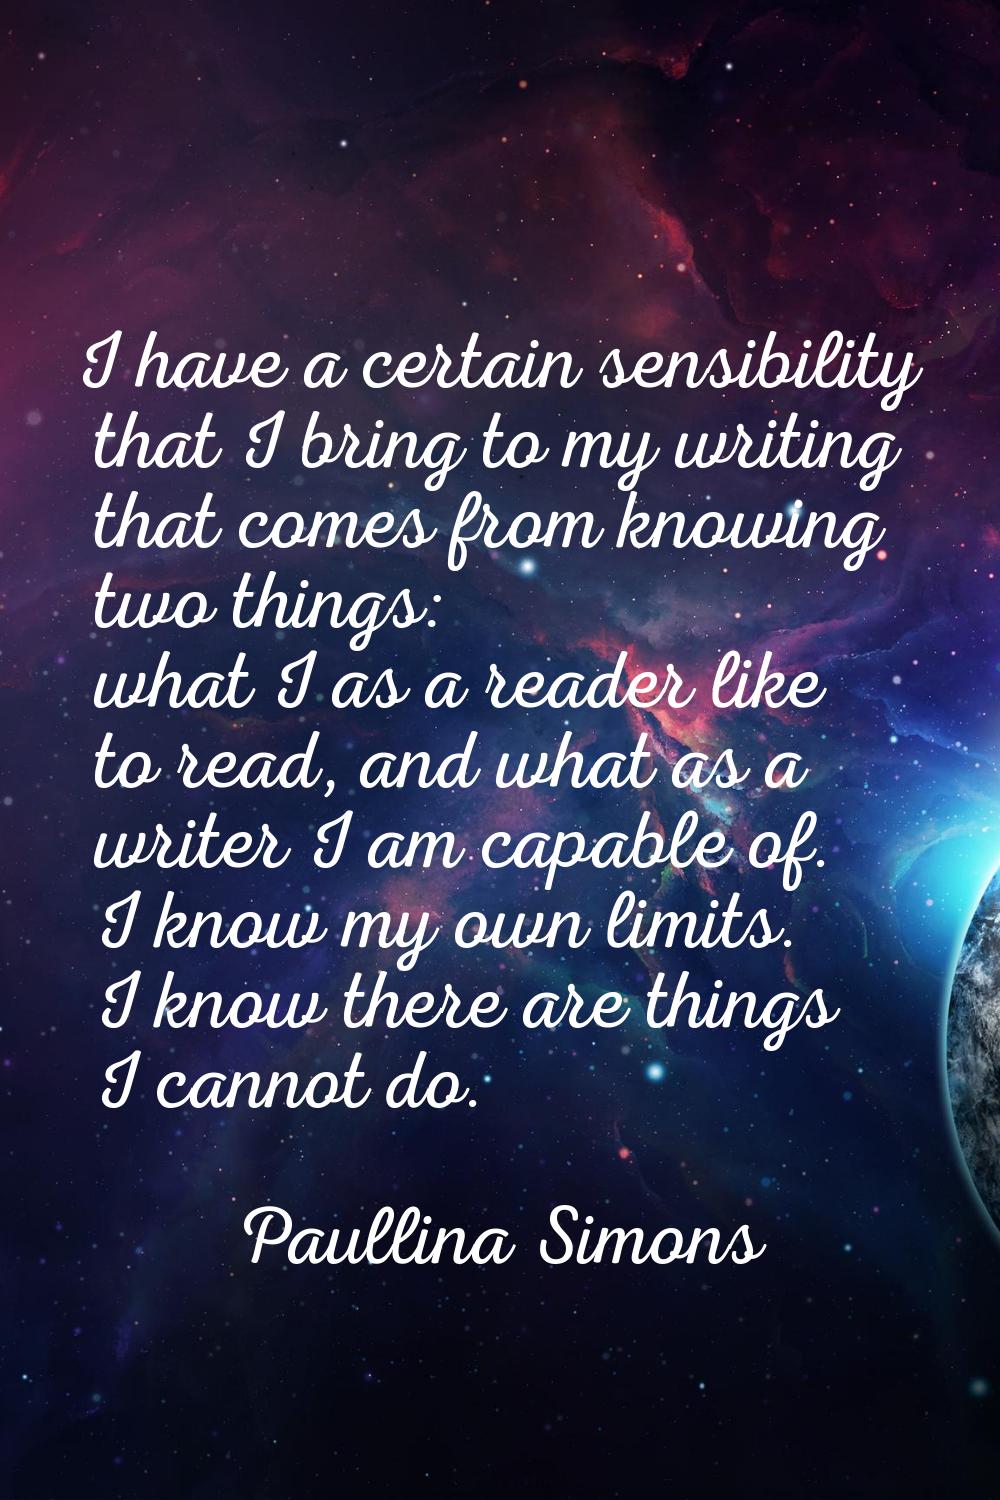 I have a certain sensibility that I bring to my writing that comes from knowing two things: what I 